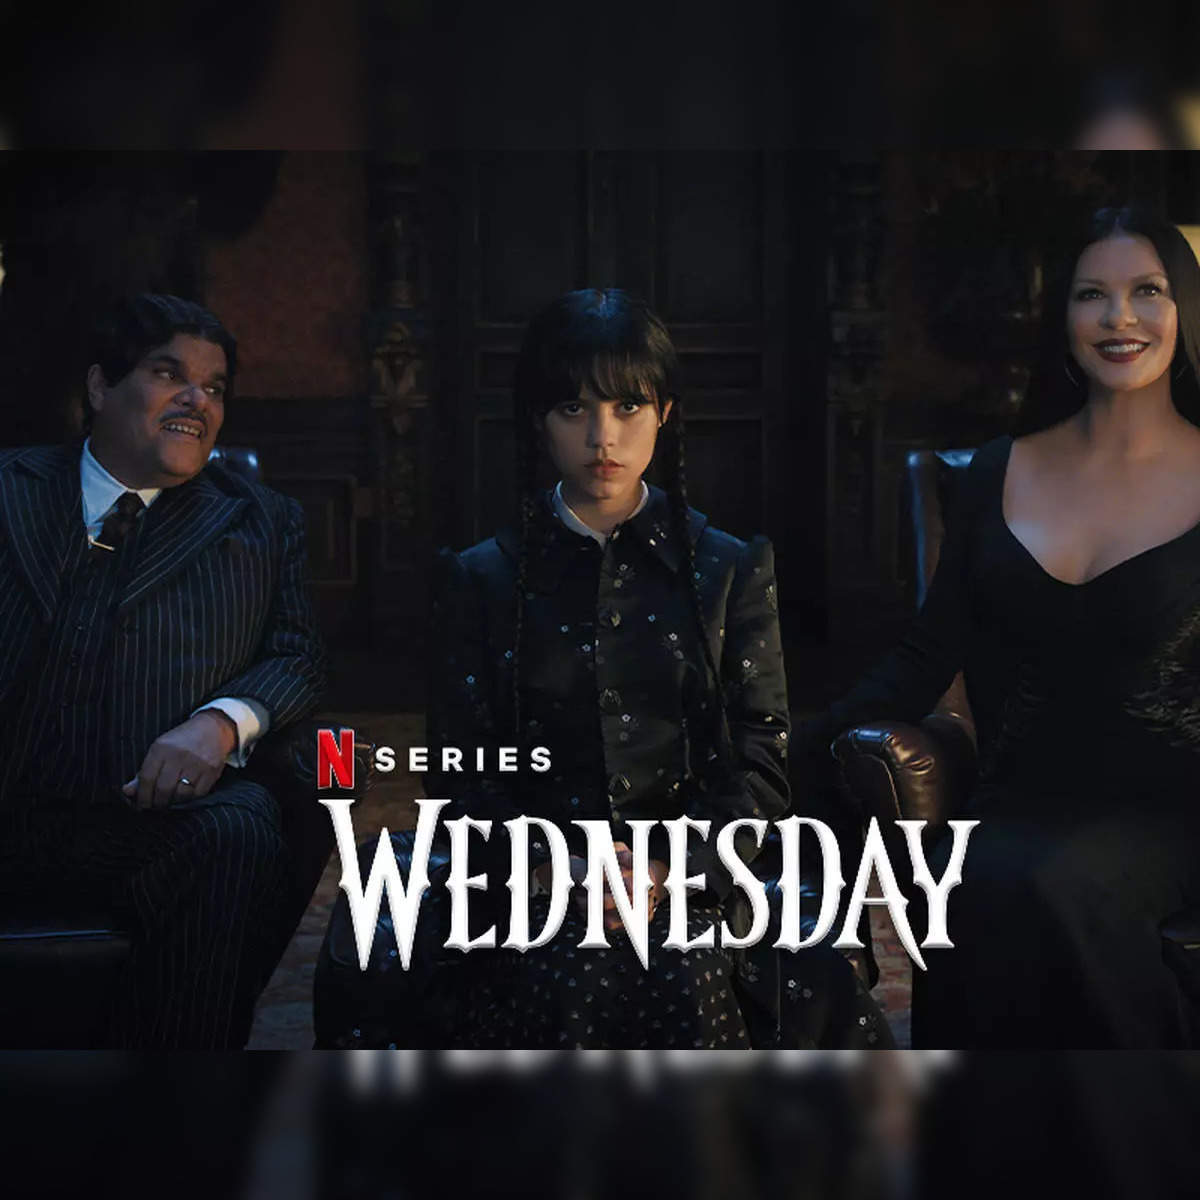 Wednesday season 2 potential release date and more